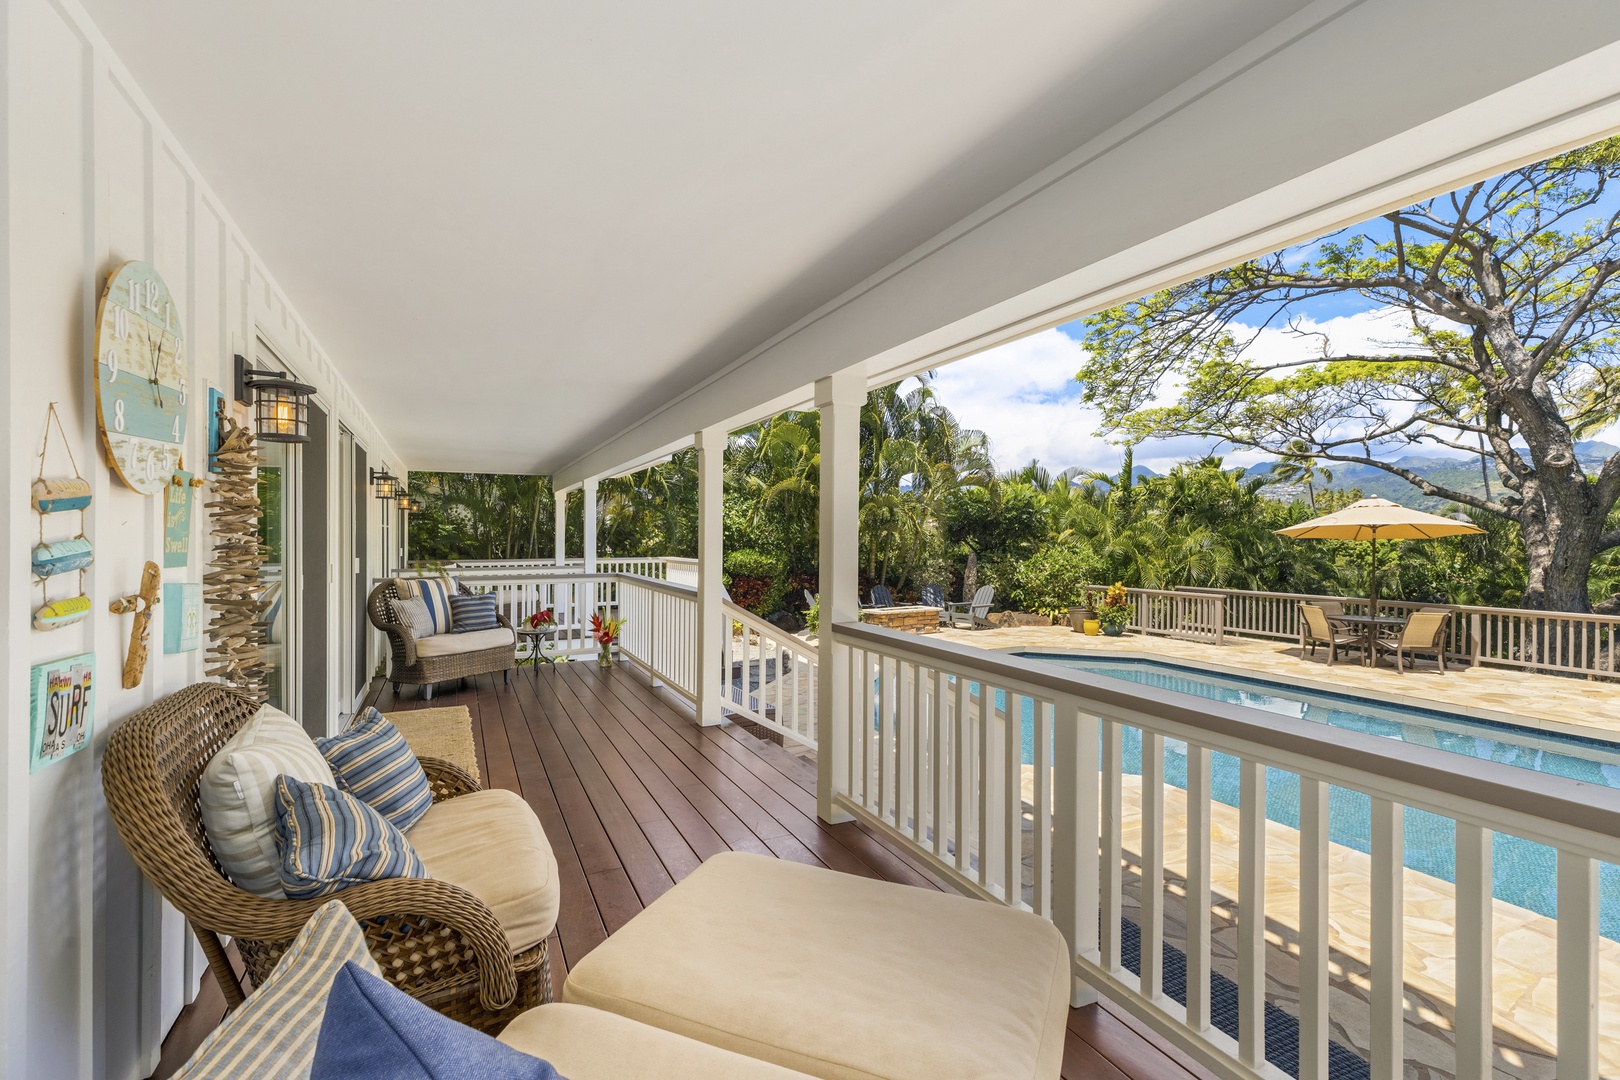 Honolulu Vacation Rentals, Hale Le'ahi* - Expansive deck overlooks the private pool, fire pit, and yard